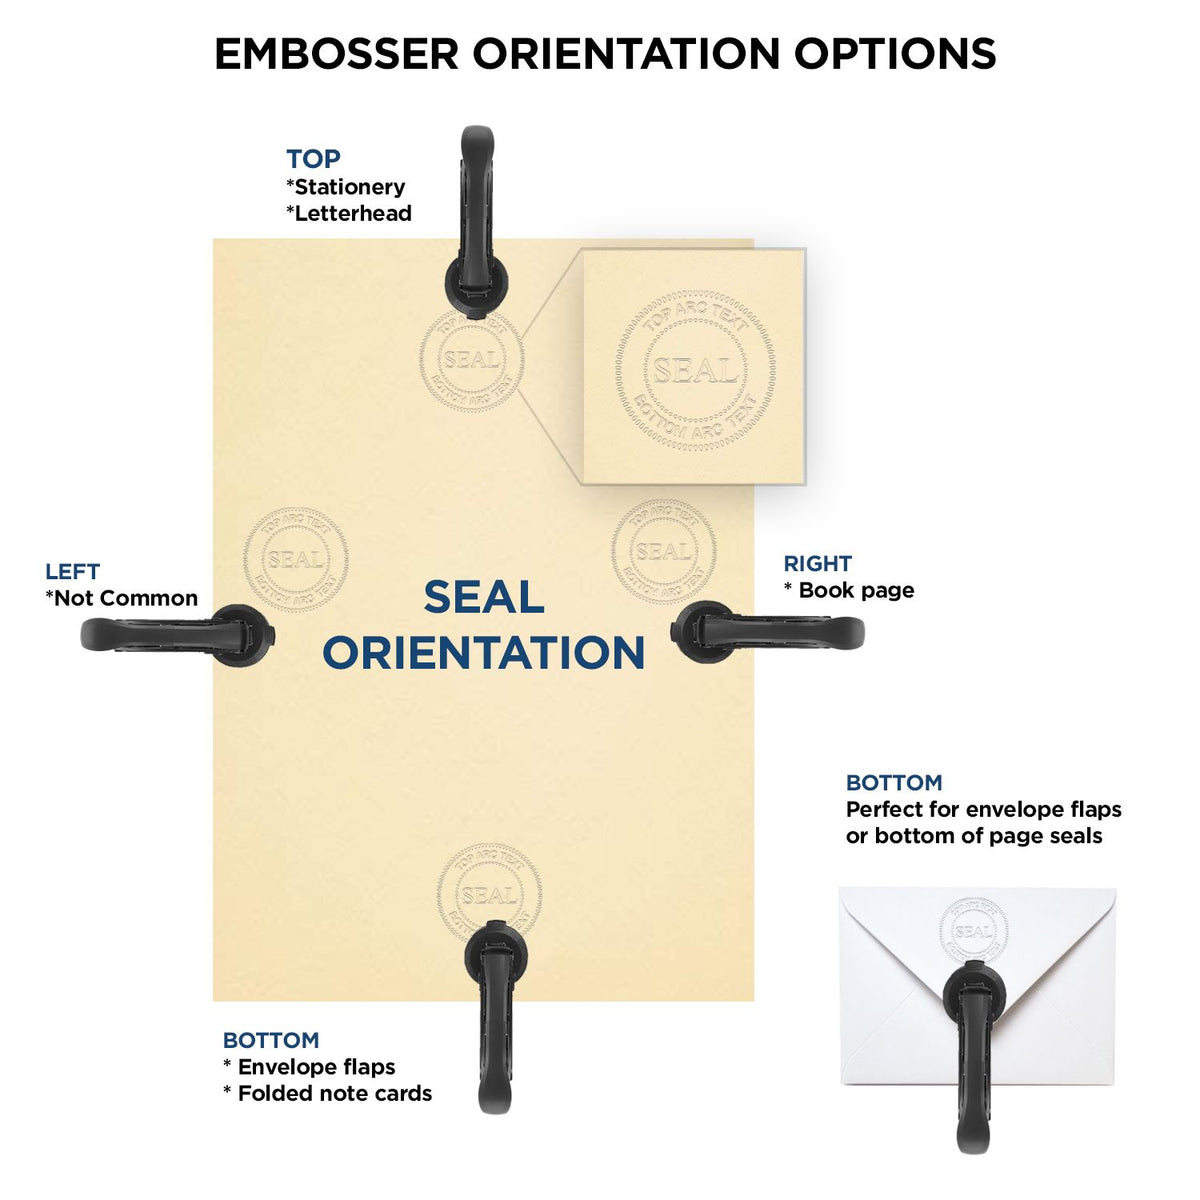 An infographic for the Soft West Virginia Professional Engineer Seal showing embosser orientation, this is showing examples of a top, bottom, right and left insert.